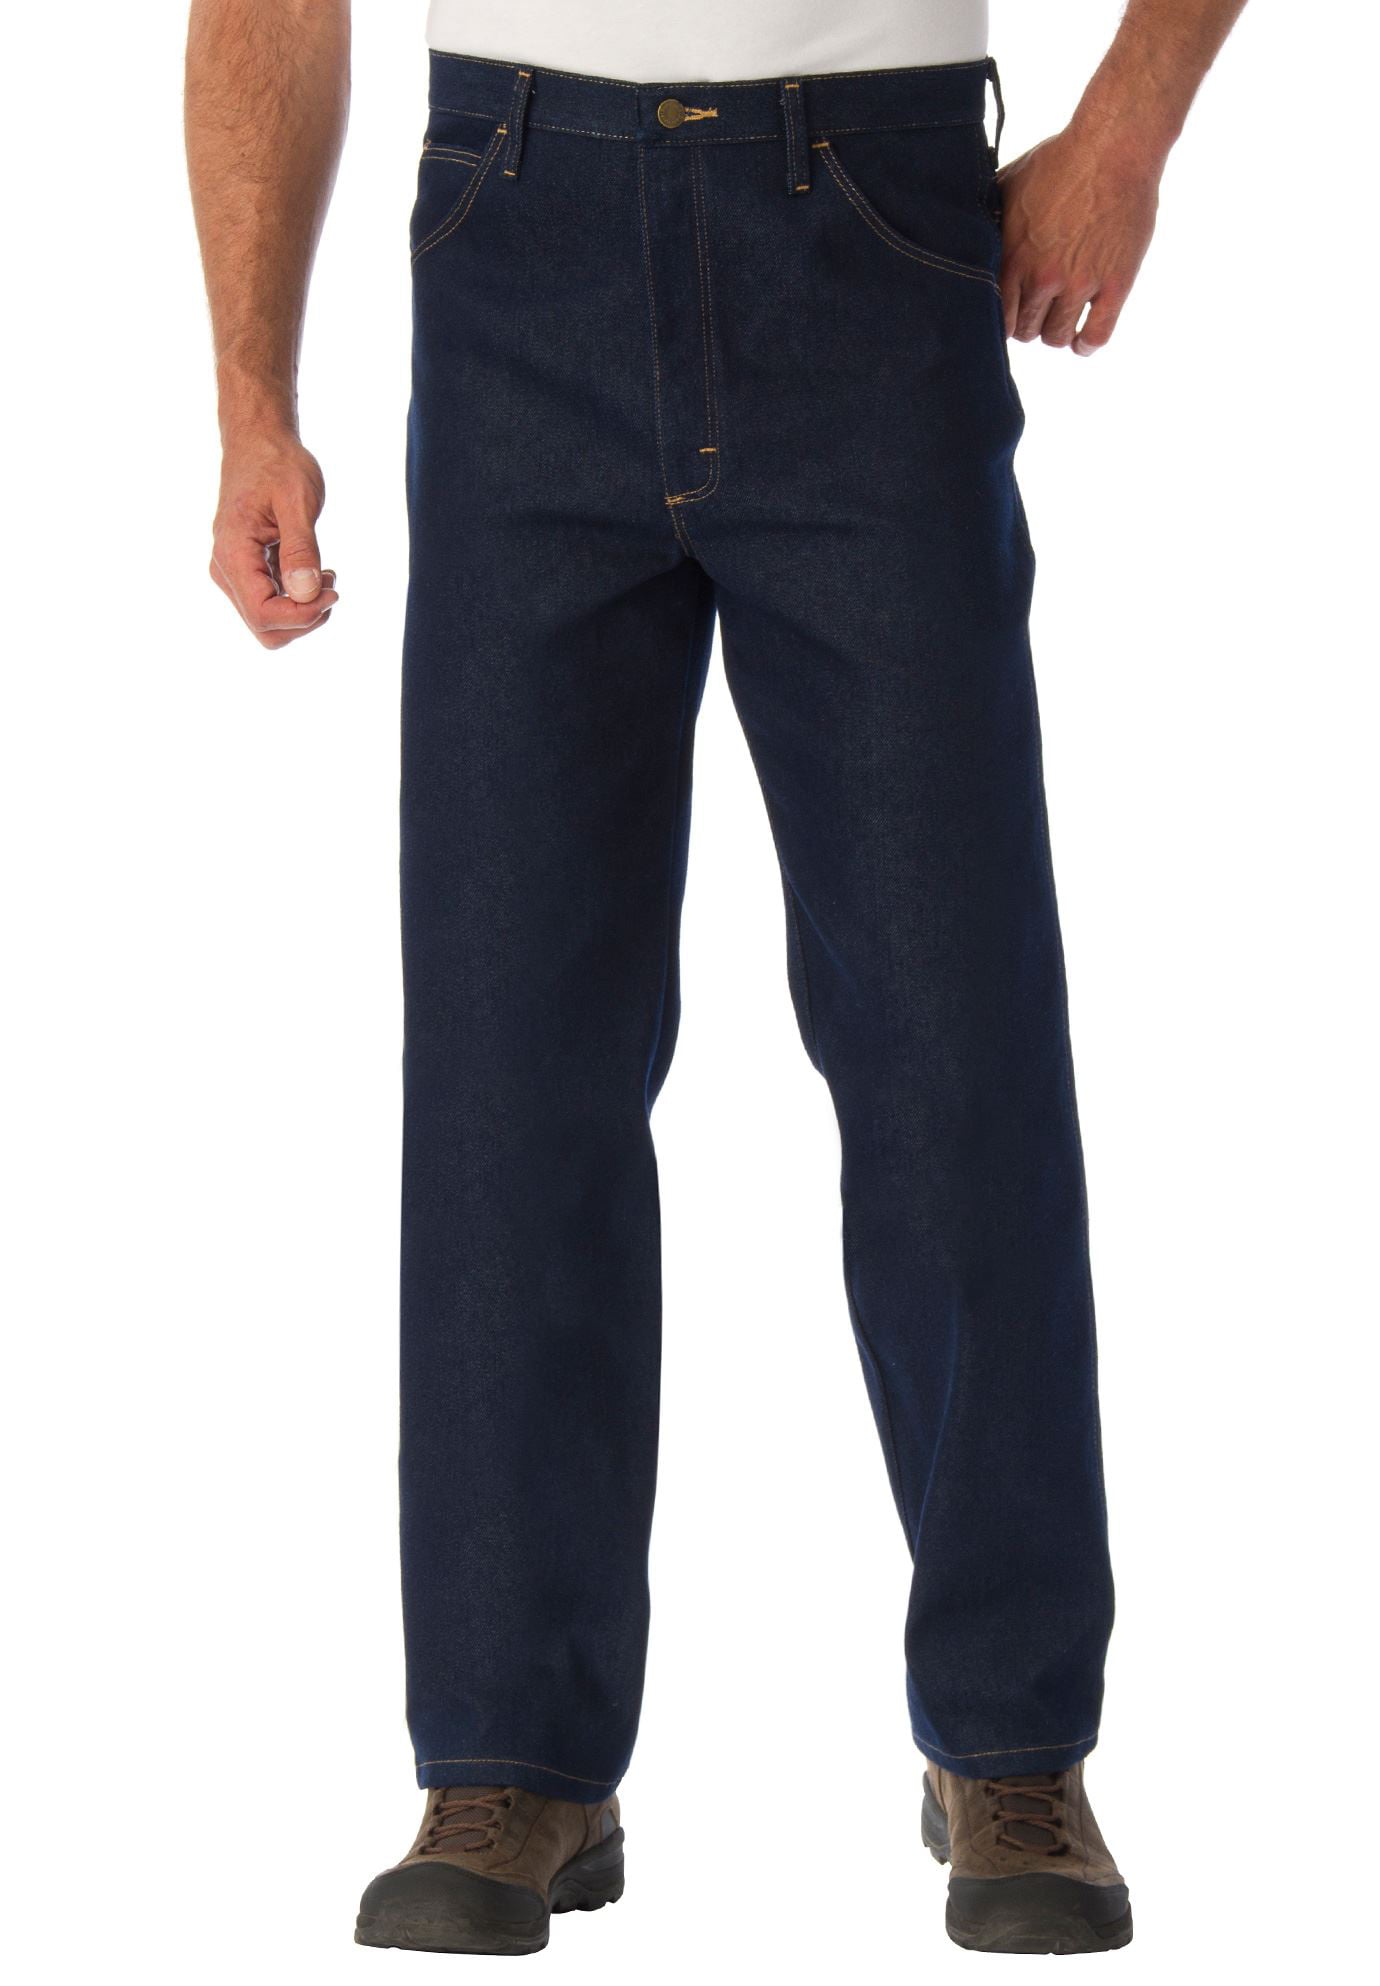 Wrangler - Wrangler Men's Big & Tall Relaxed Fit Stretch Jeans